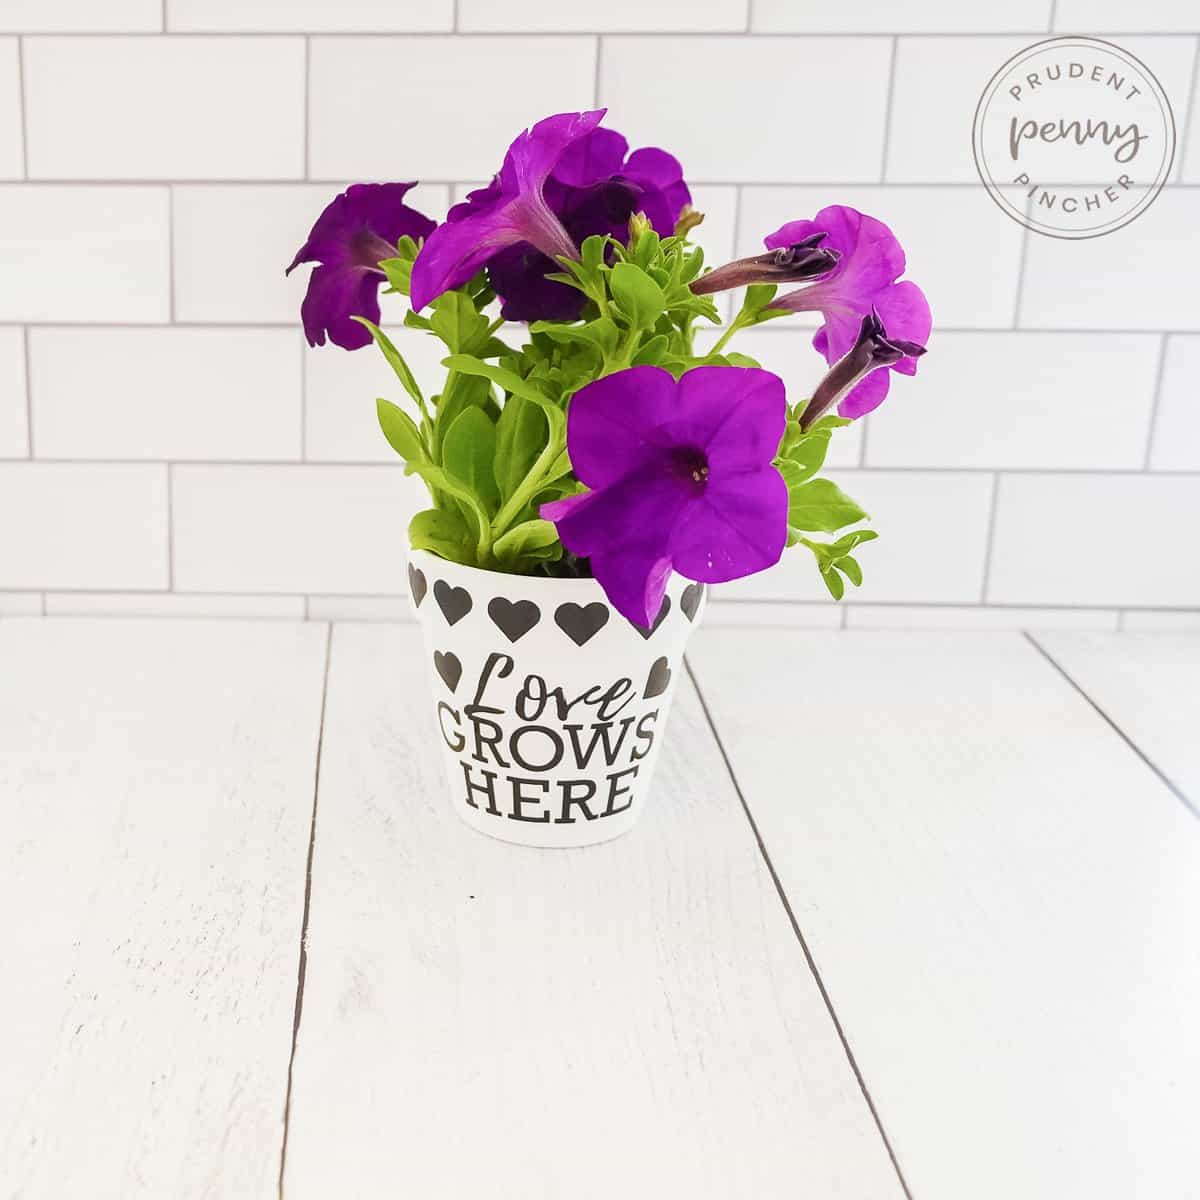 Mother’s Day Flower Pot with words "love grows here" and purple petunias